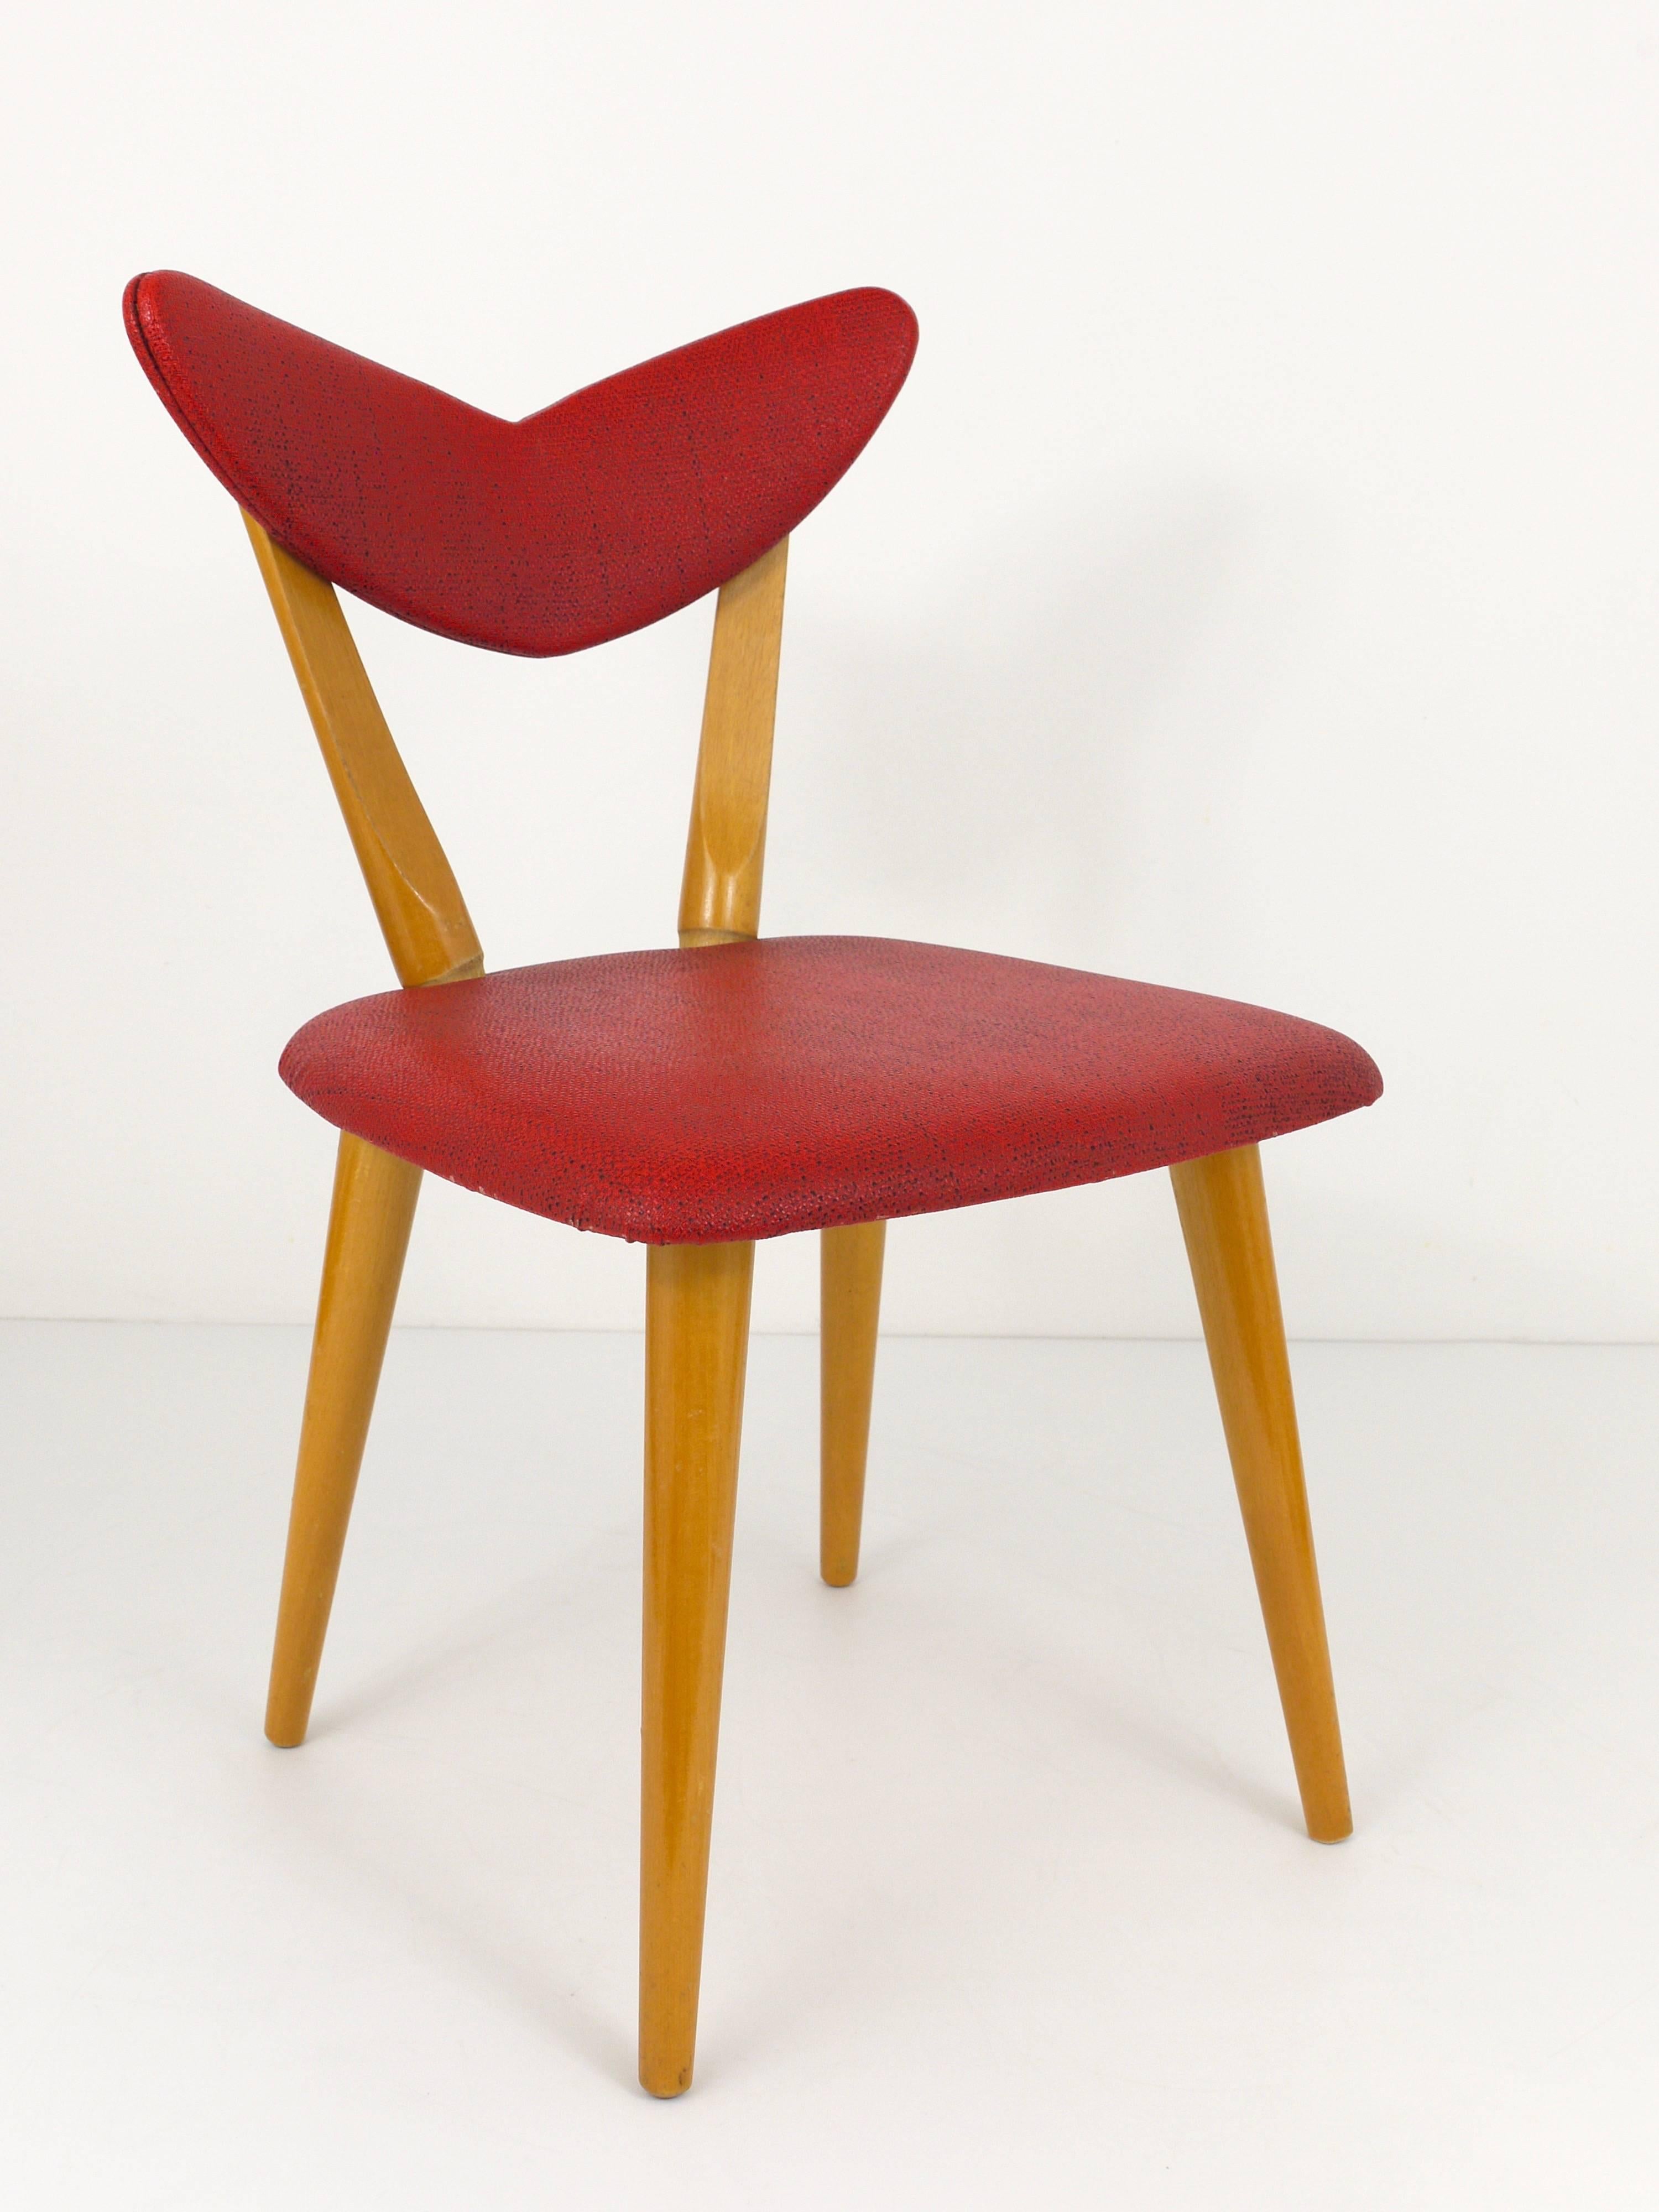 20th Century Red Heart Mid Century Modern Chair for Children,  Austria, 1950s For Sale